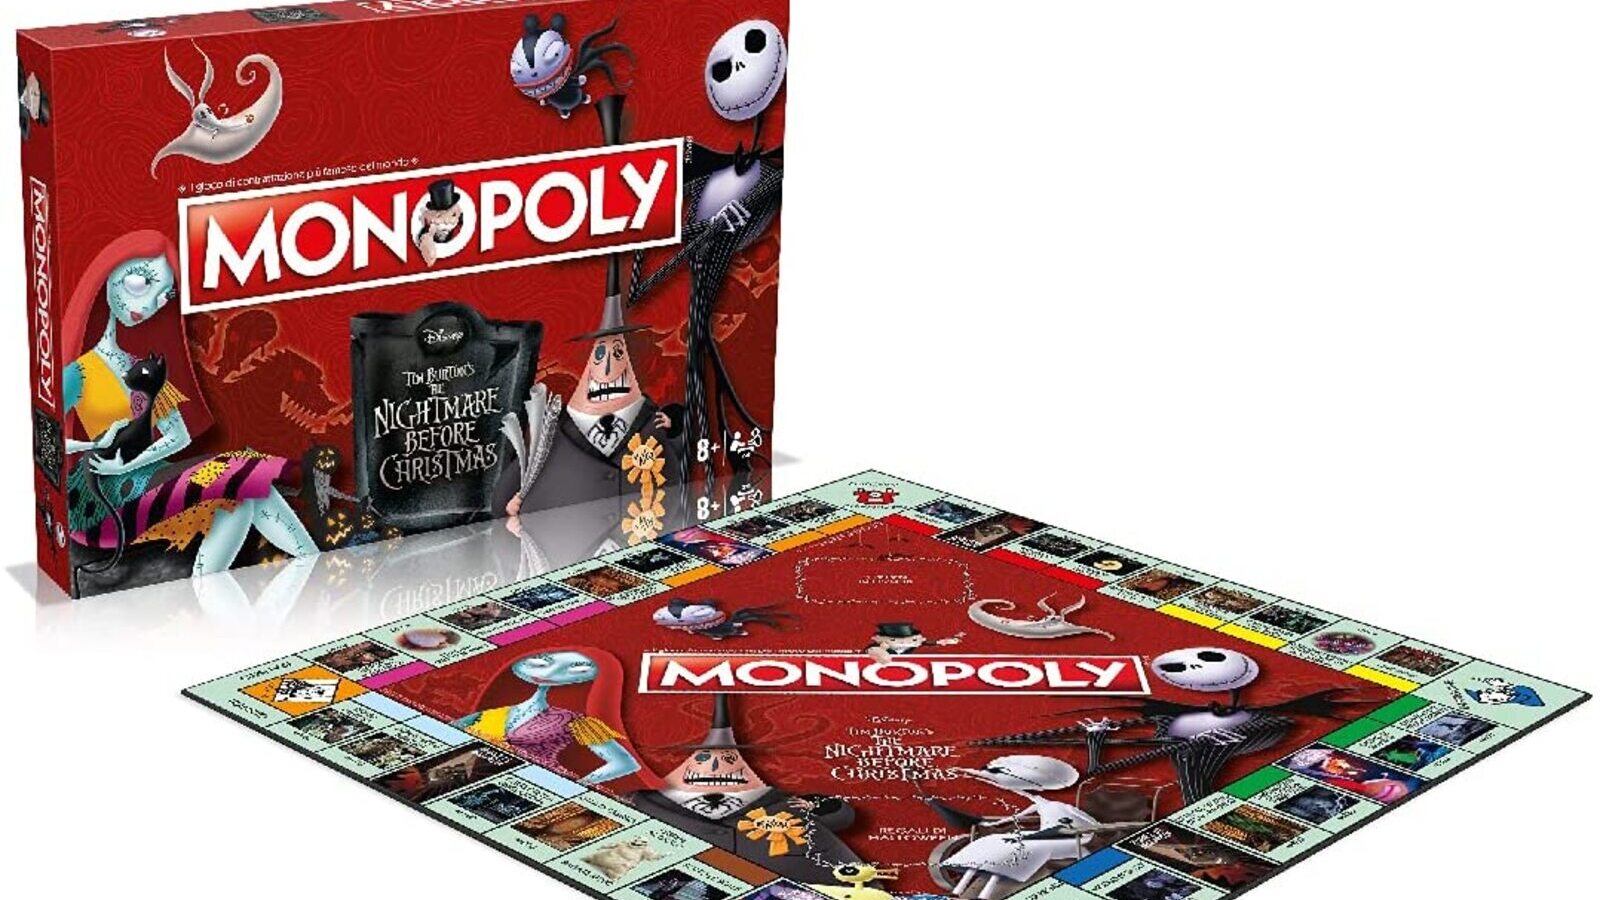 Disney: The Nightmare Before Christmas Monopoly is at a once-in-a-lifetime price on Amazon